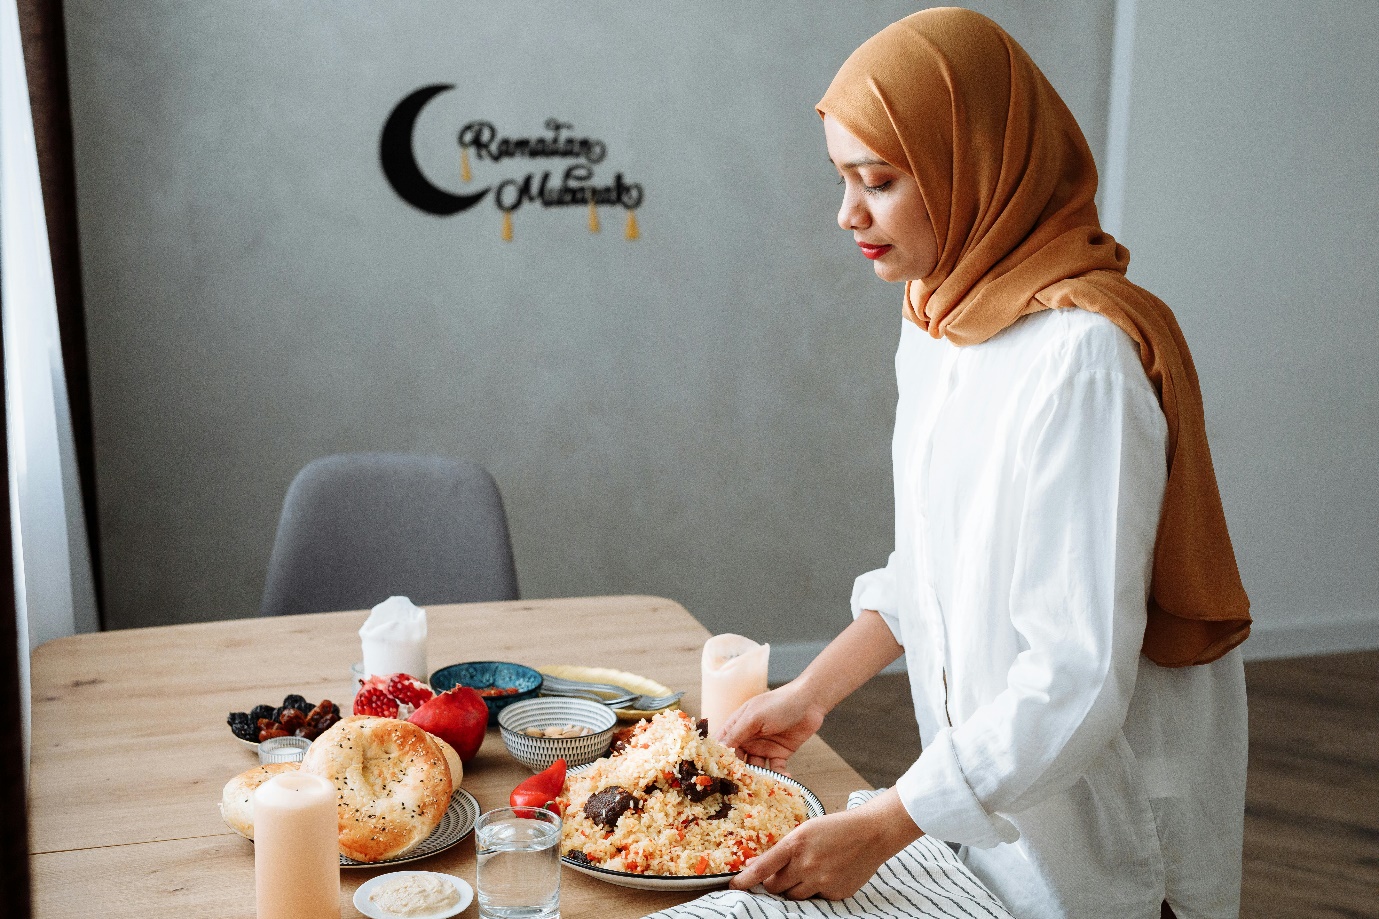 A person in a white shirt and brown head scarf holding a plate of food Description automatically generated